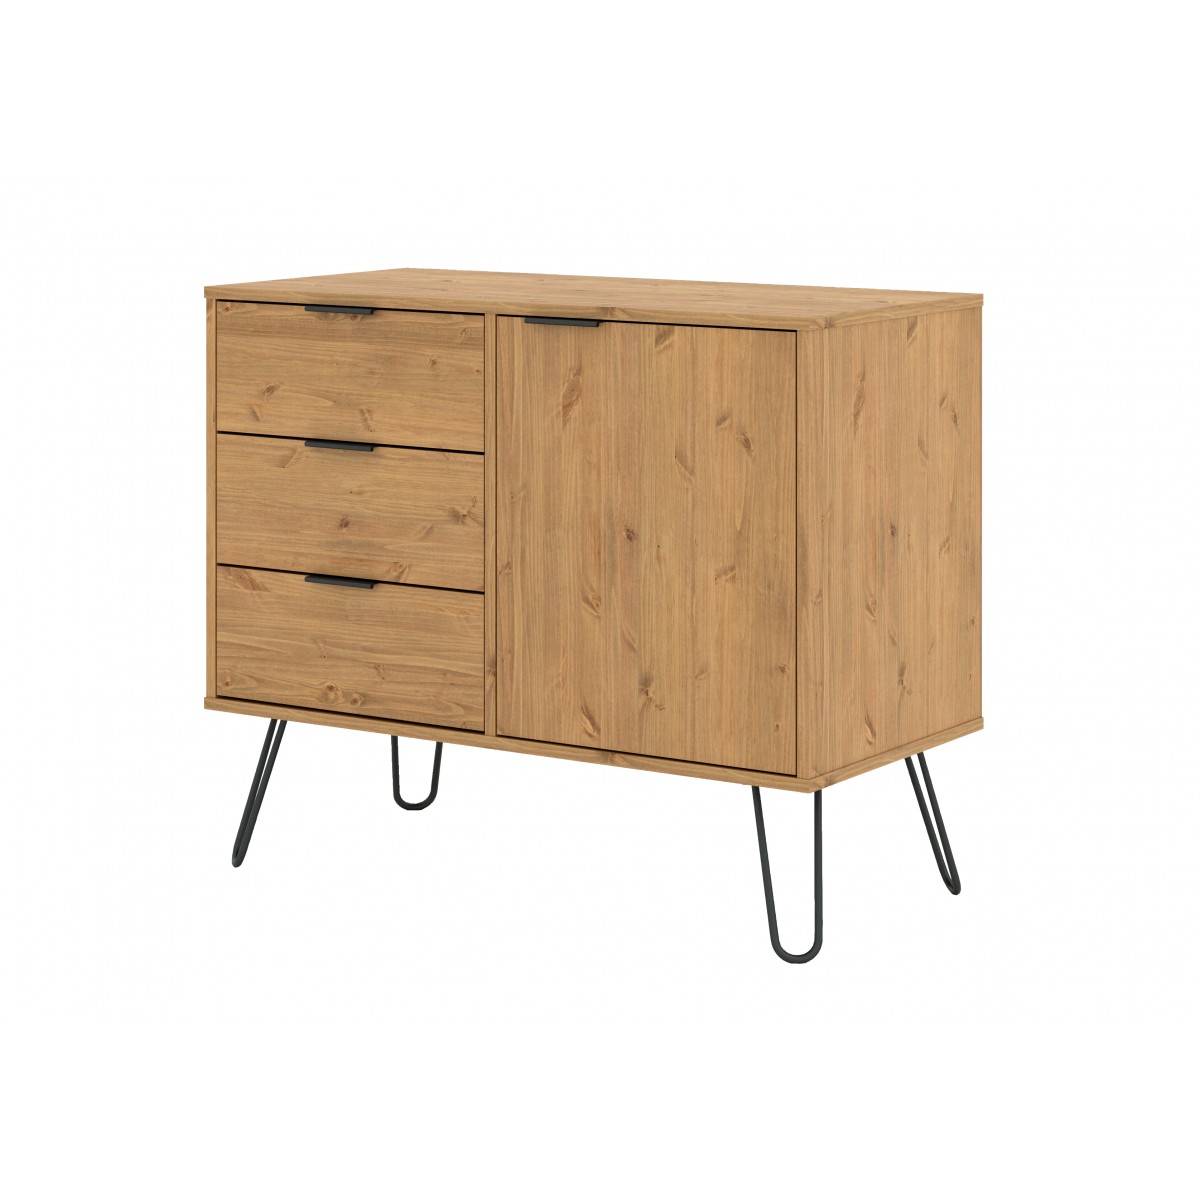 Core Augusta small sideboard with 1 door, 3 drawers in antique waxed pine